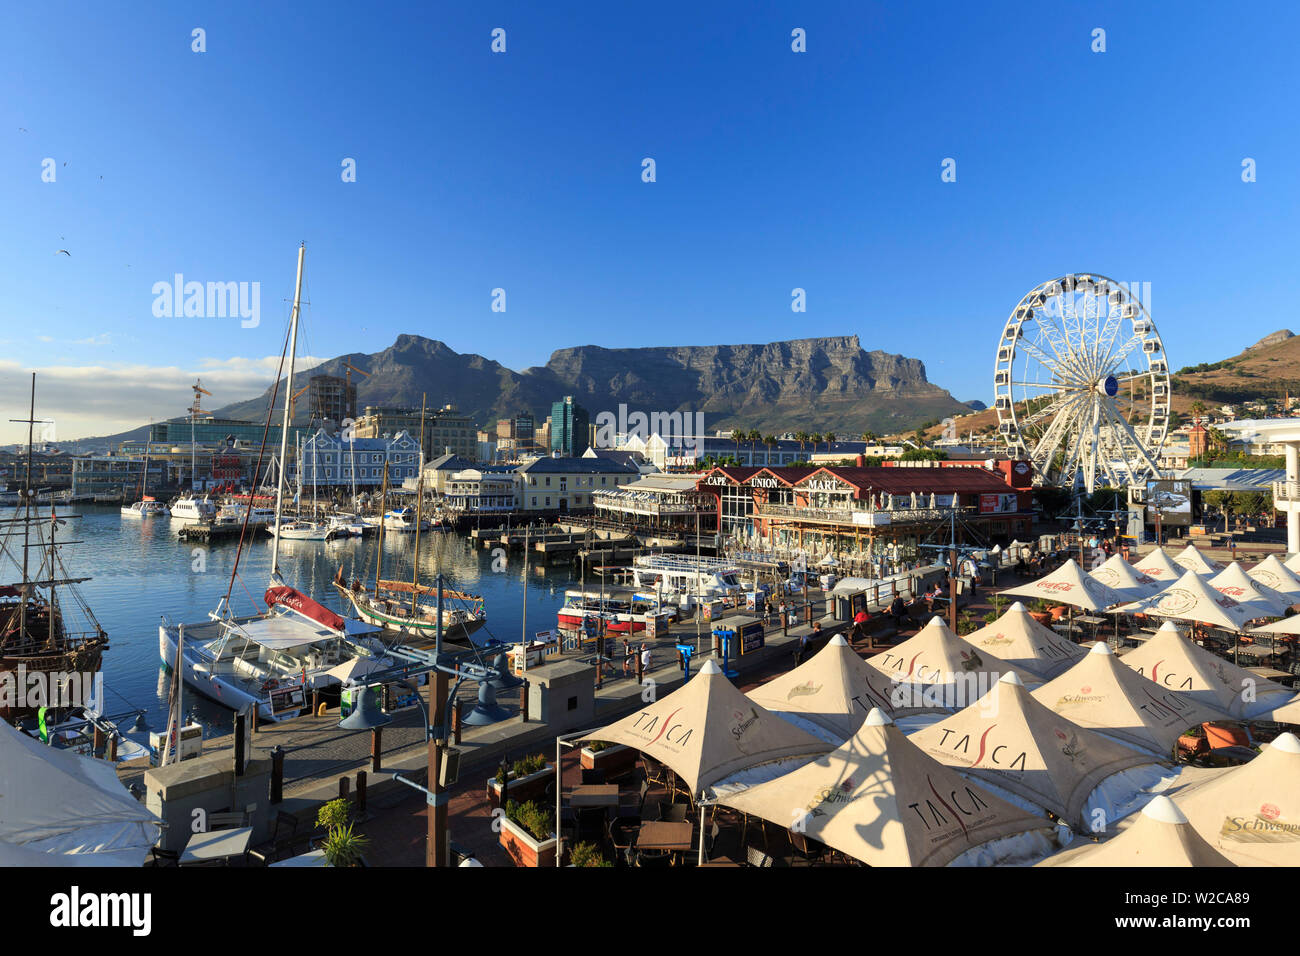 South Africa, Western Cape, Cape Town, V&A Waterfront, Victoria Wharf Stock Photo